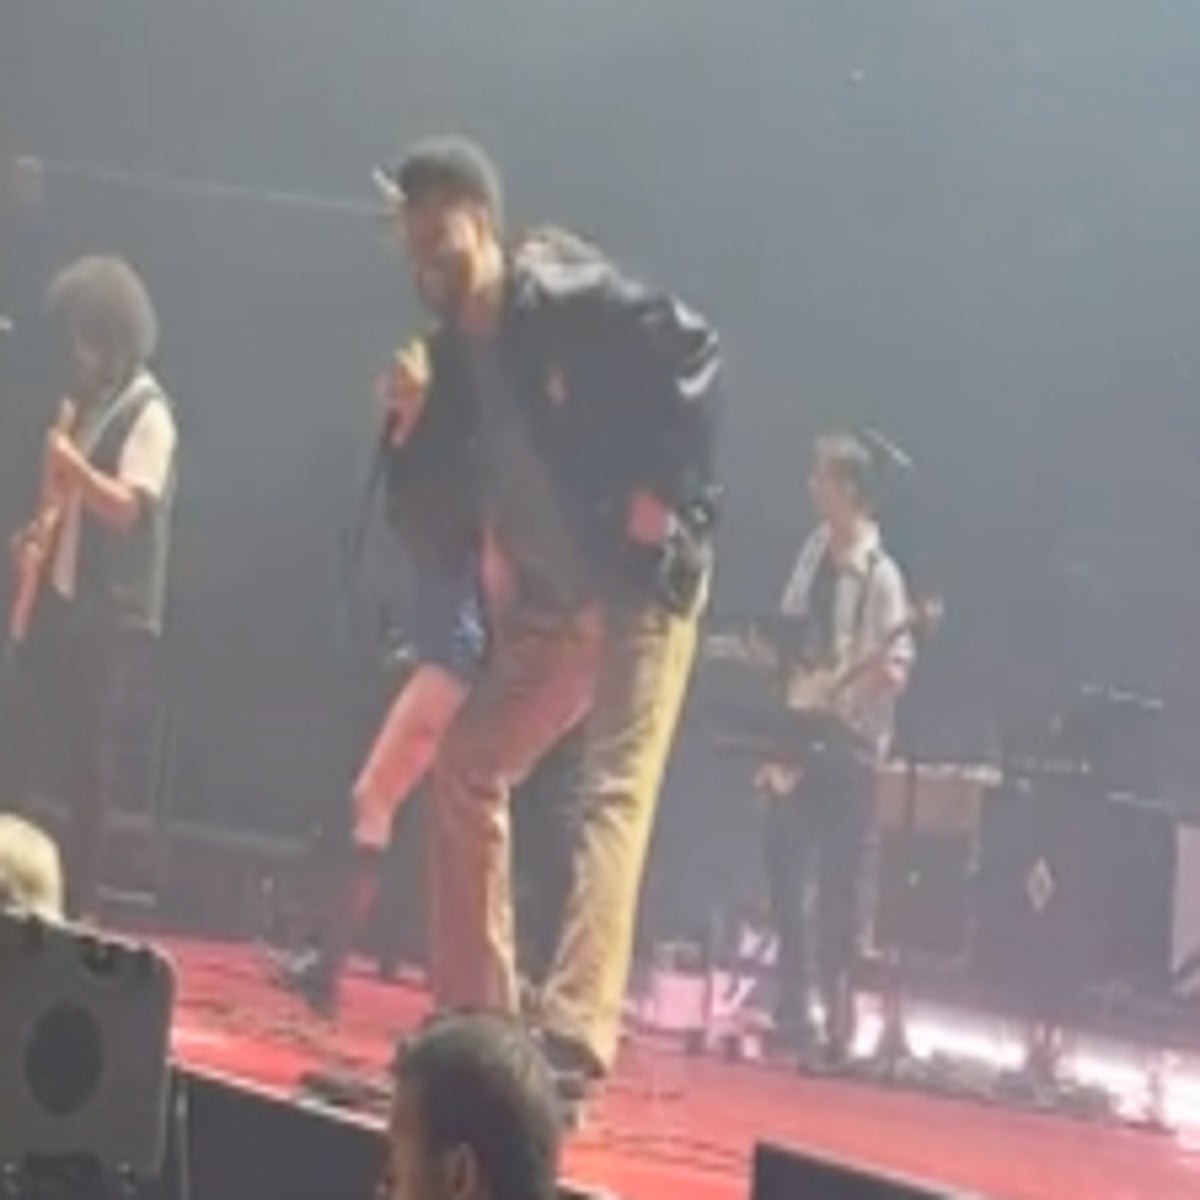 Rock singer apologizes for urinating on man on stage at Florida